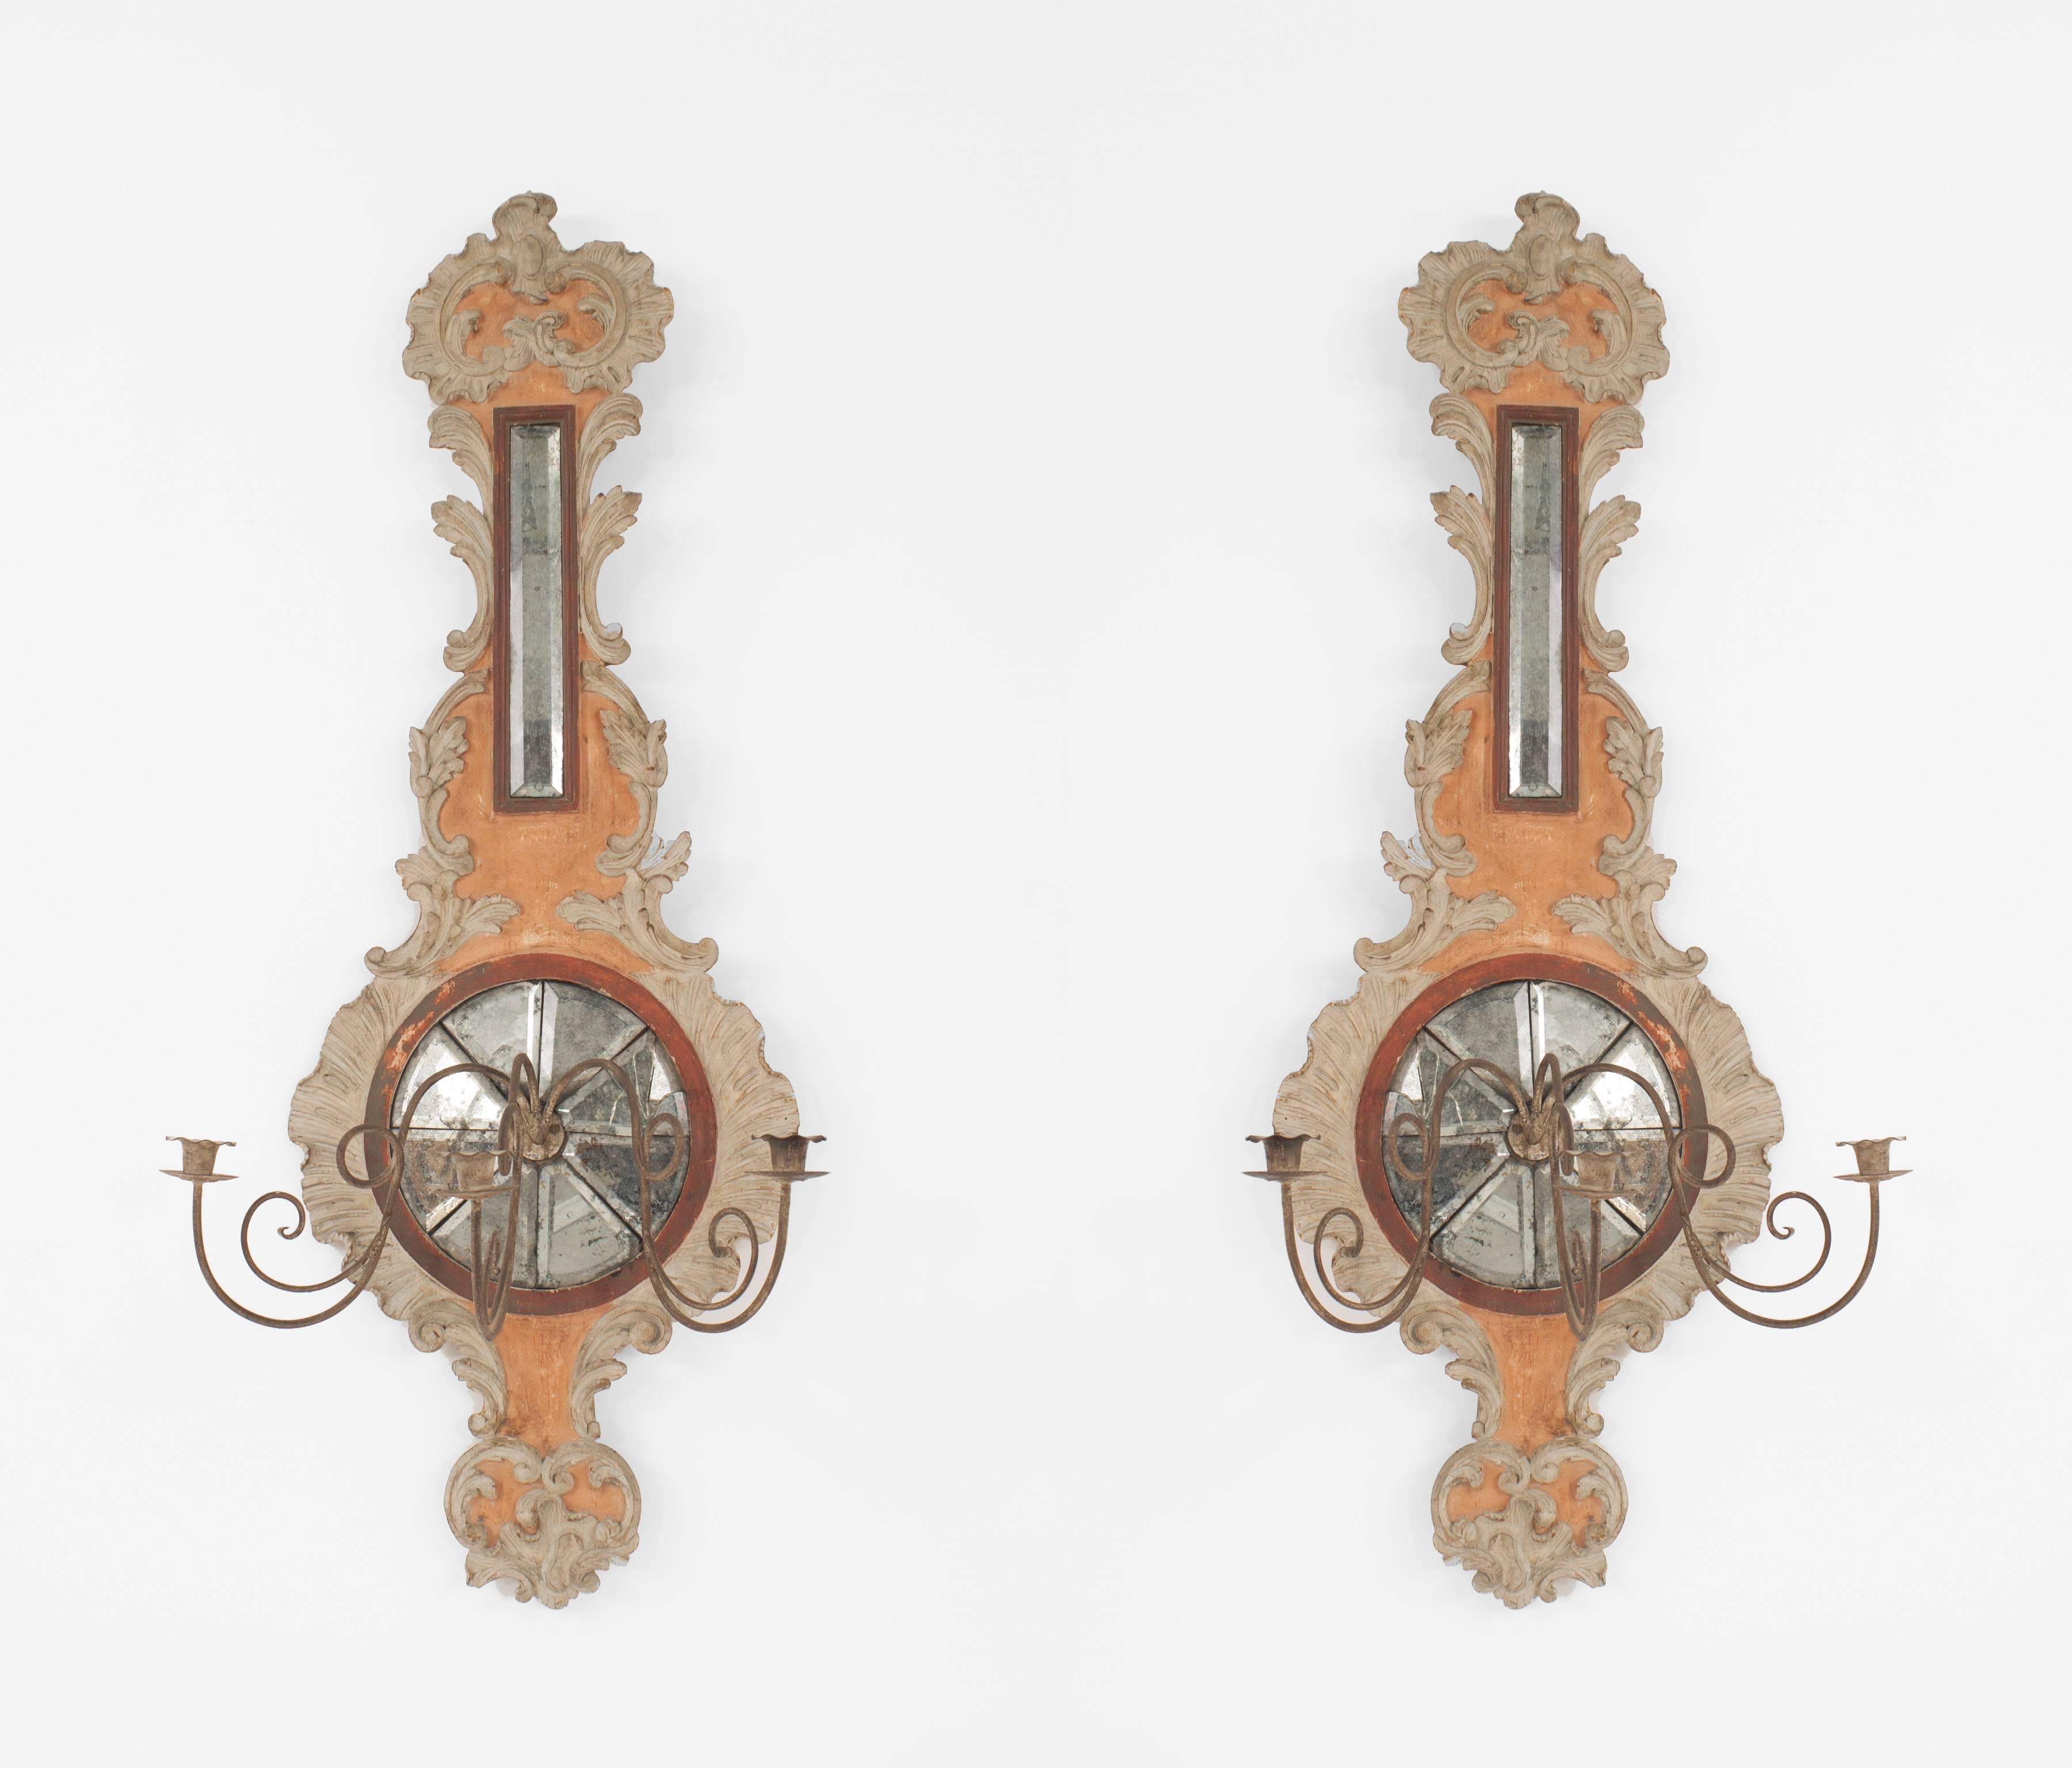 Pair of Italian Neo-classic (19th-20th century) beige and peach painted & carved wood barometer-shaped wall sconces with 3 patinated brass arms and mirrored detail (one piece of glass 